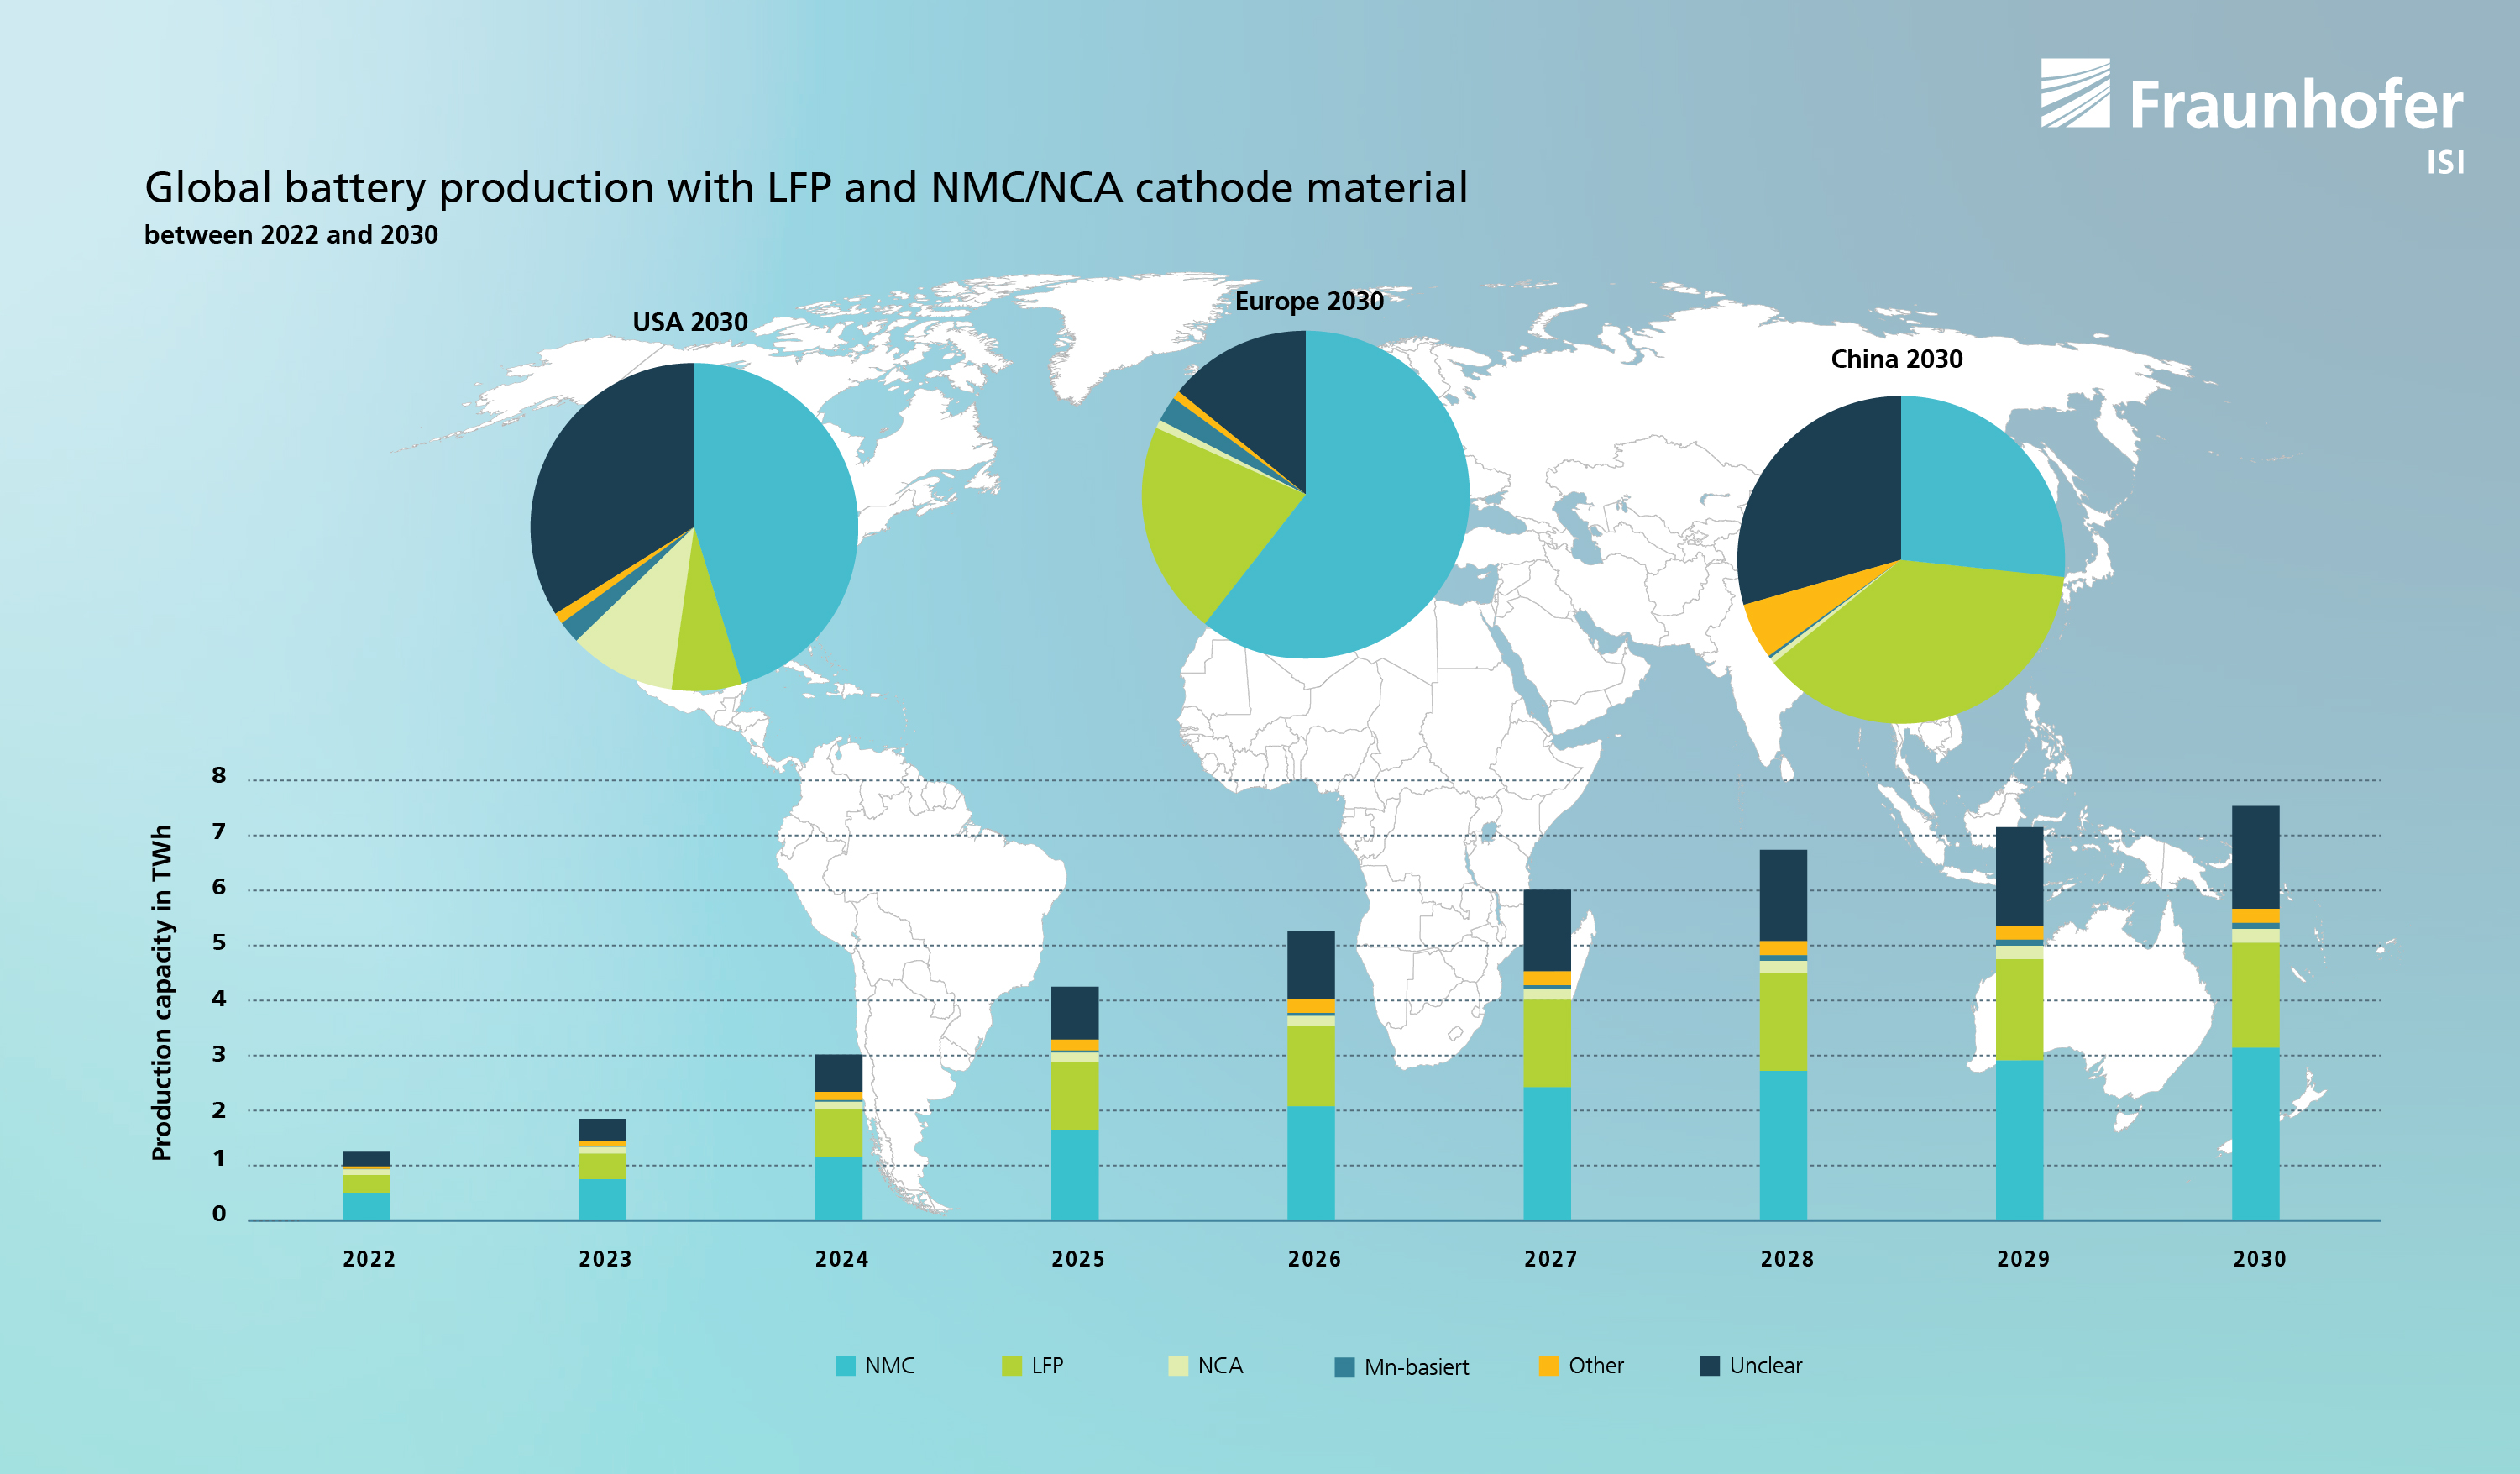 Global battery production with LFP and NMC/NCA cathode material between 2022 and 2030